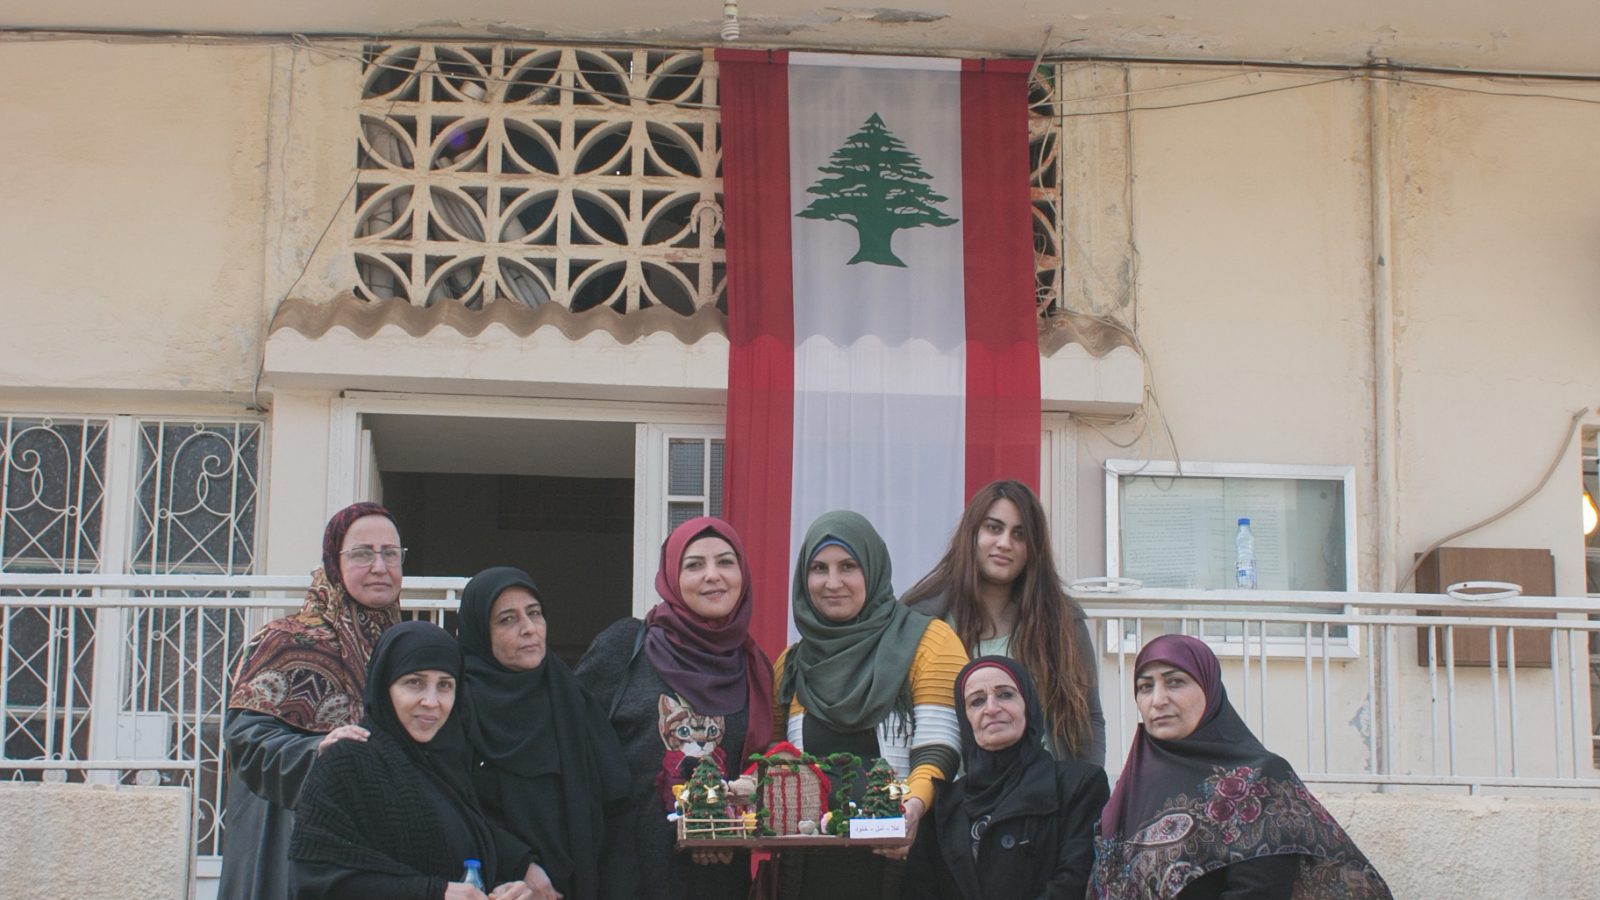 Souhayla and some of the participants of the EU-funded DAWRIC workshop pose with one of their creations in front of the municipality of Douris in Lebanon